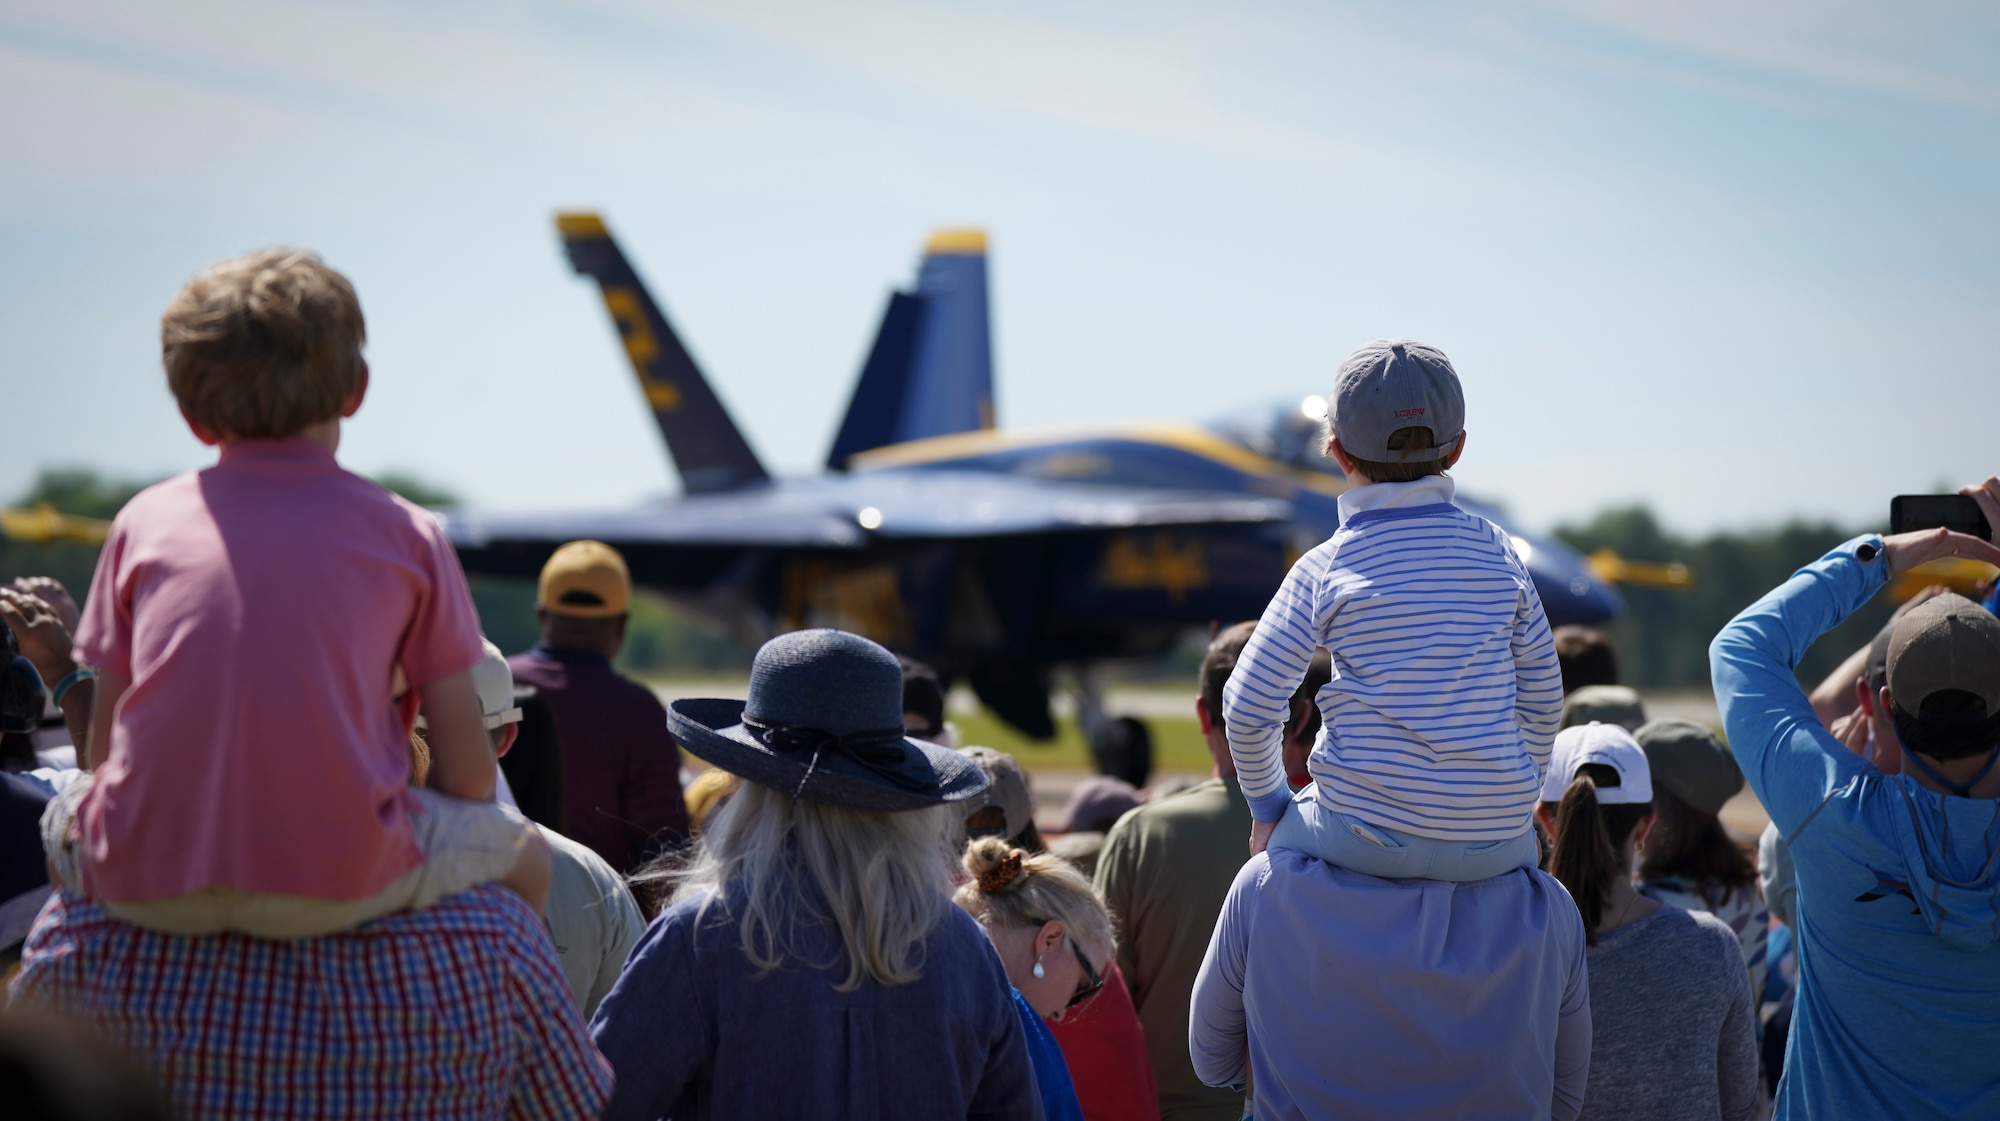 Spectators attend the Beyond the Horizon Air and Space Show at Maxwell Air Force Base, Ala. April 6, 2024. The air and space show boasted a variety of activities, including military and civilian aerial demonstrations, static display aircraft, and a STEM expo. Organized by Maxwell Air Force Base in collaboration with civilian partners and sponsors, the event aimed to celebrate the rich heritage of aviation while also providing an opportunity for the public to engage with the military community. (U.S. Air Force Photo Senior Master Sgt. Richard P. Ebensberger)